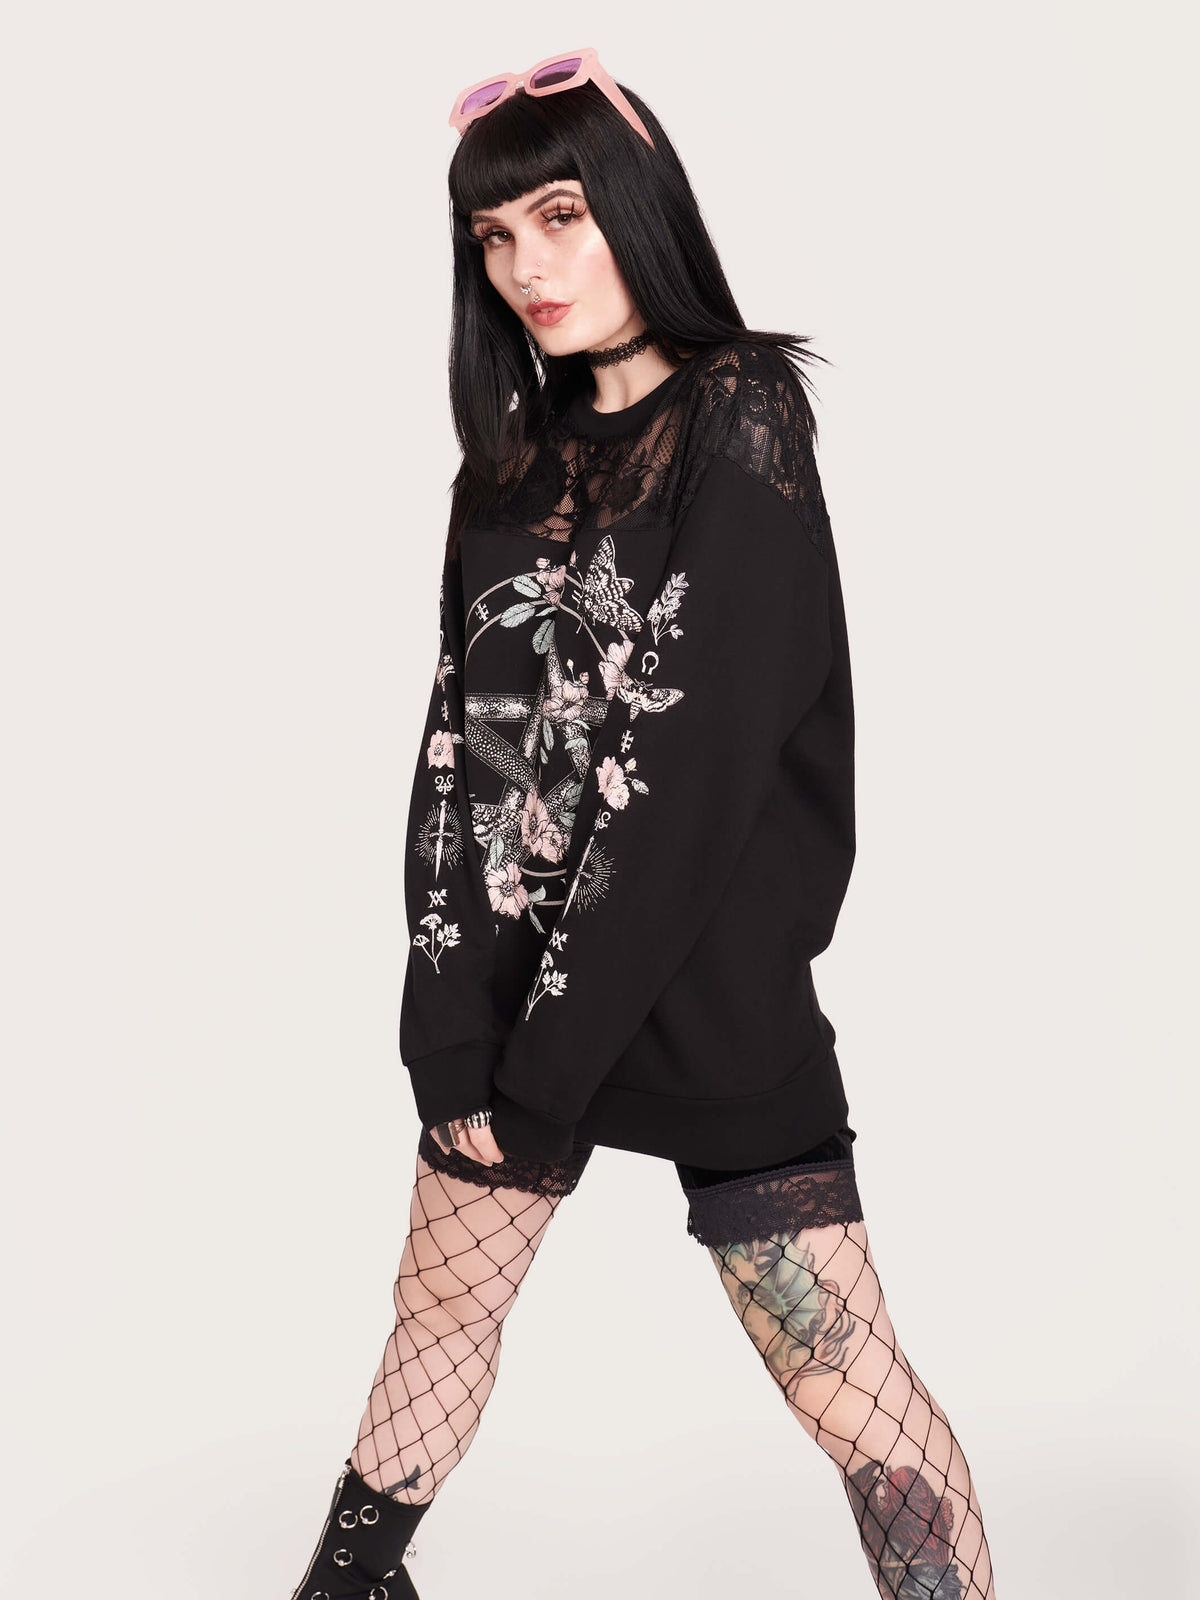 black sweatshirt featuring a deathmoth, pentacle, and magic herbs on the front and arms with black fishnet yoke in front and back.